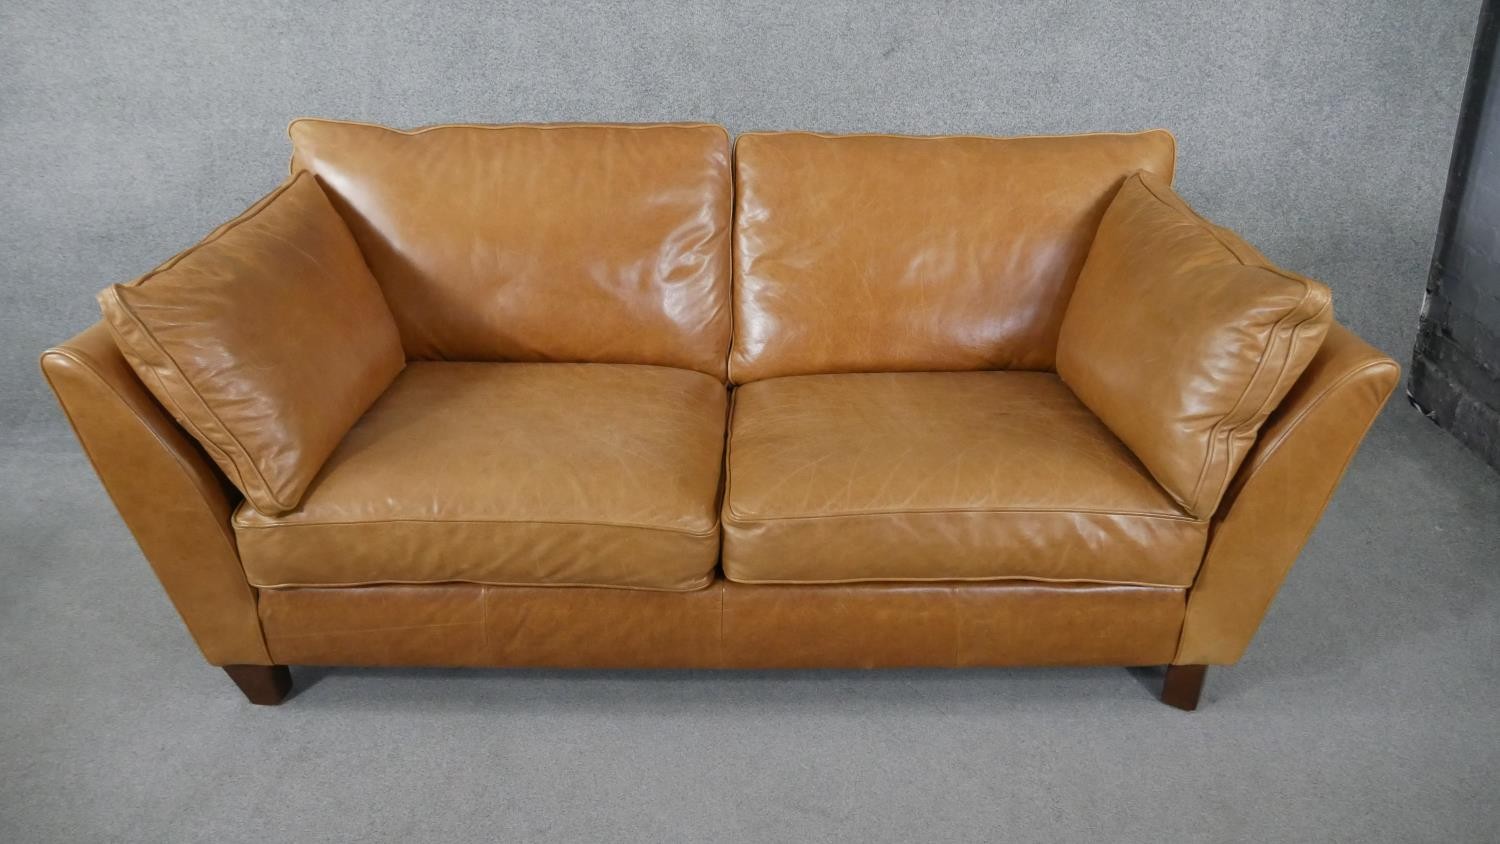 An Art Deco style two seater sofa in light tan leather upholstery. H.84 W.179 D.97cm